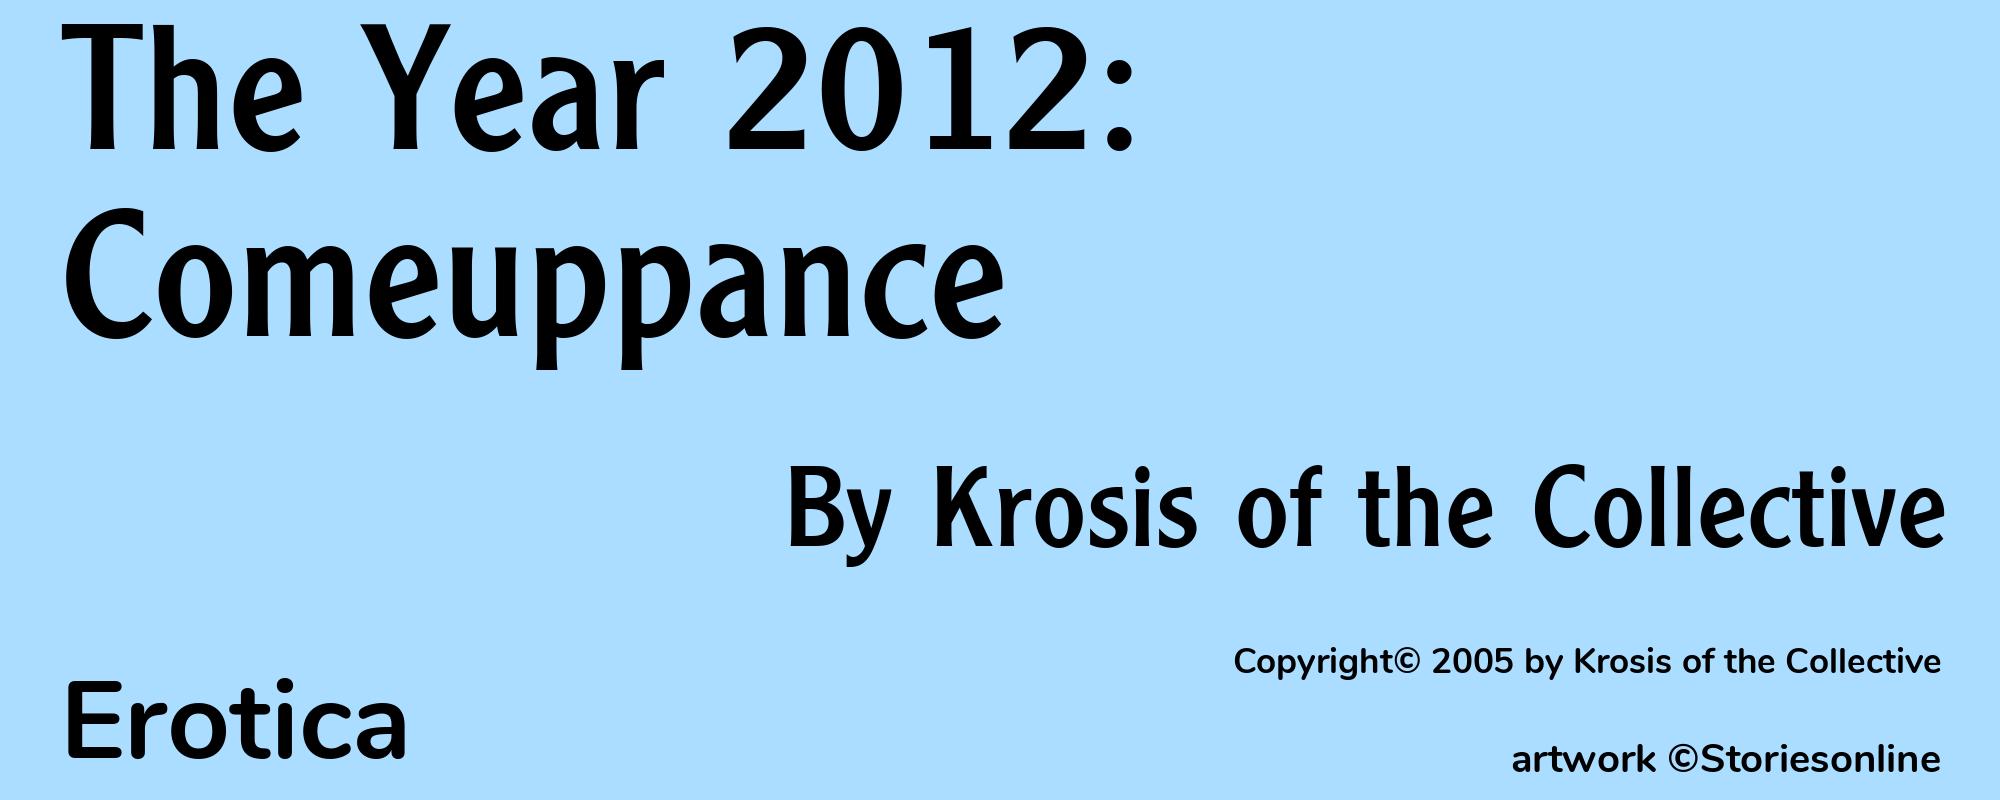 The Year 2012: Comeuppance - Cover